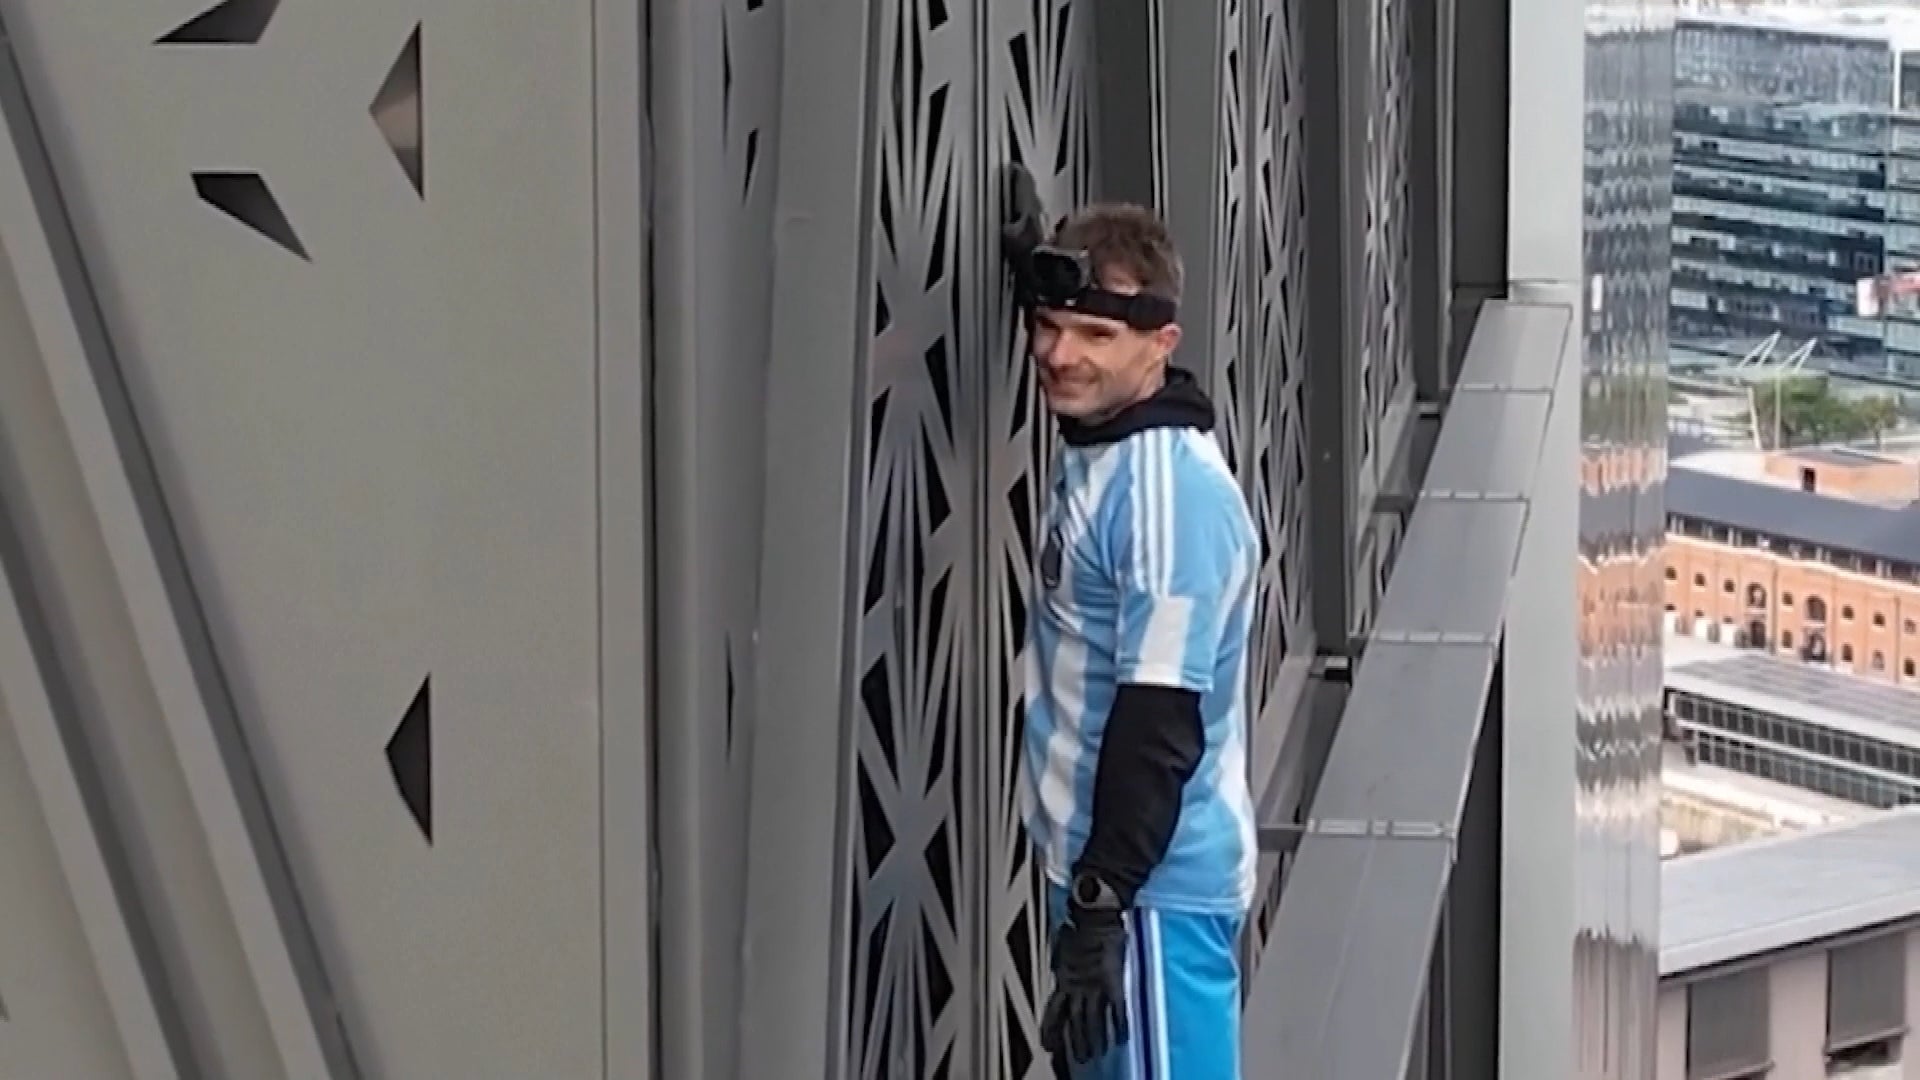 Man in Argentina soccer jersey free-climbing tower